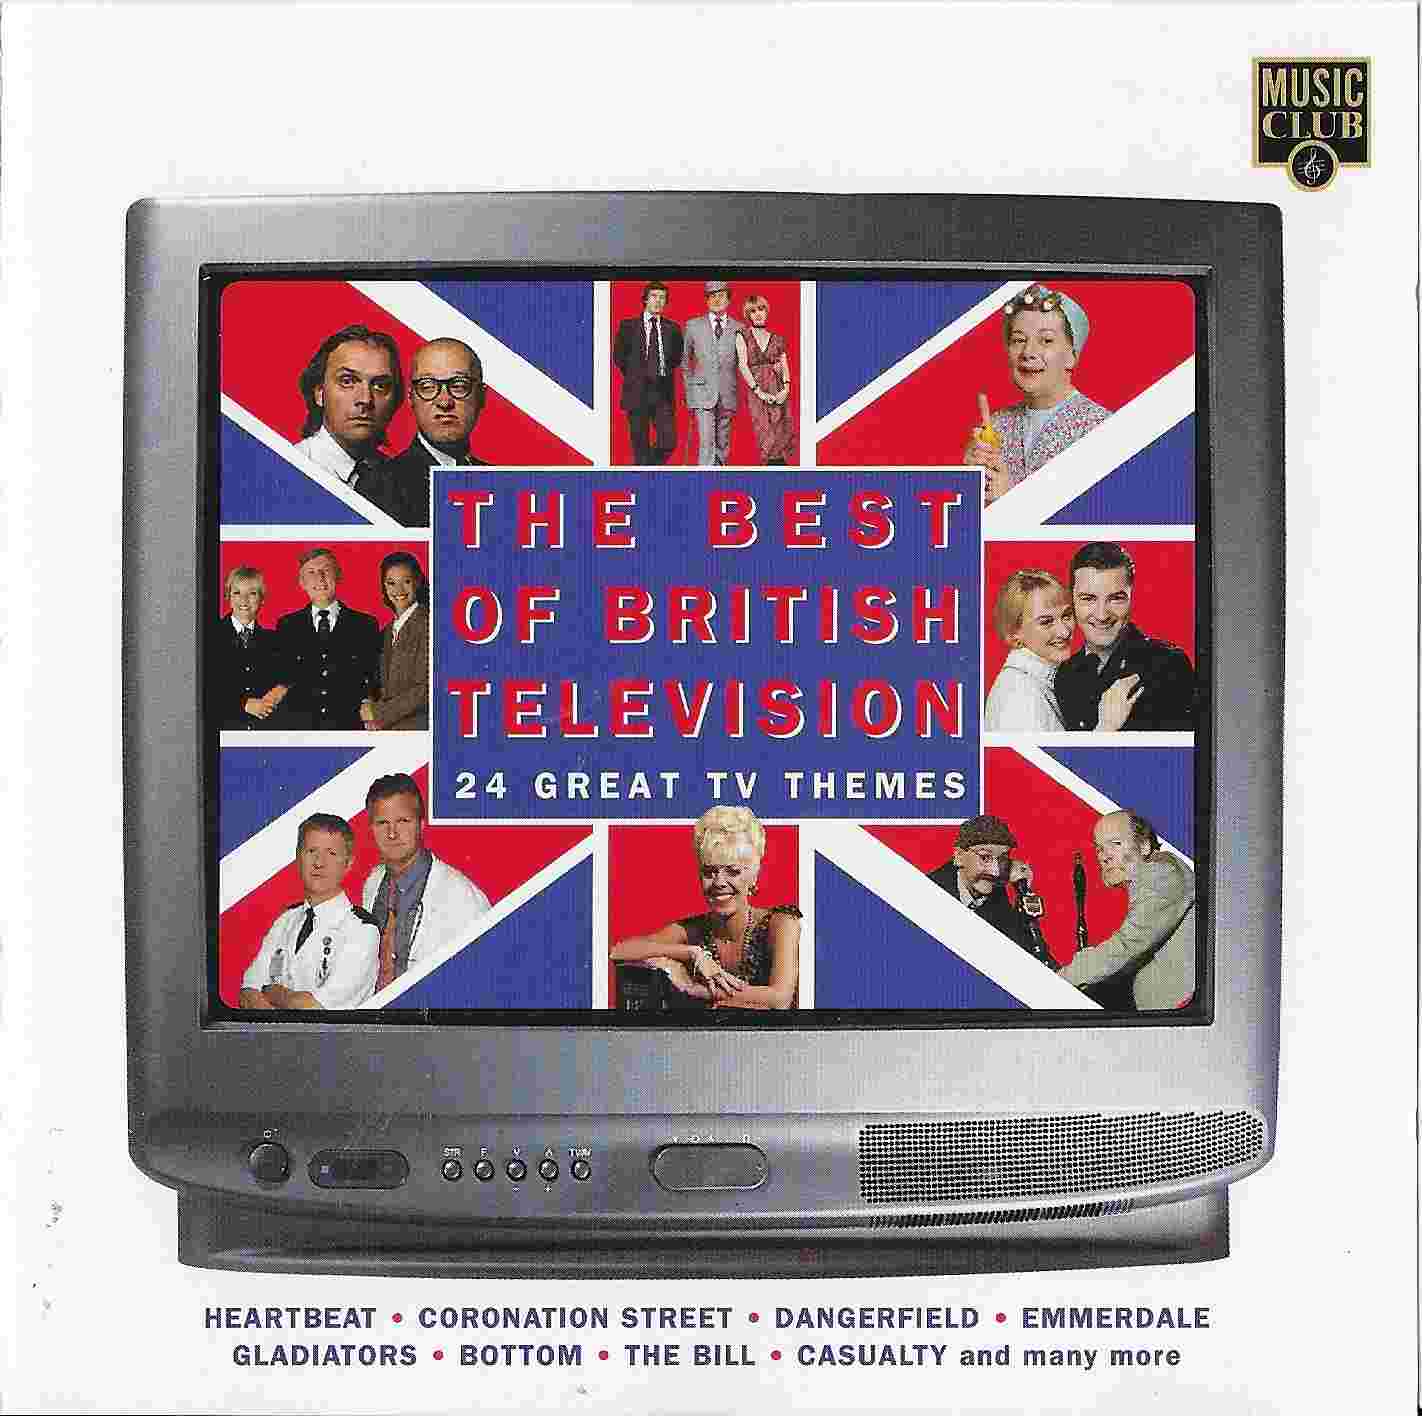 Picture of MCCD 225 The best of British television by artist Various from ITV, Channel 4 and Channel 5 library